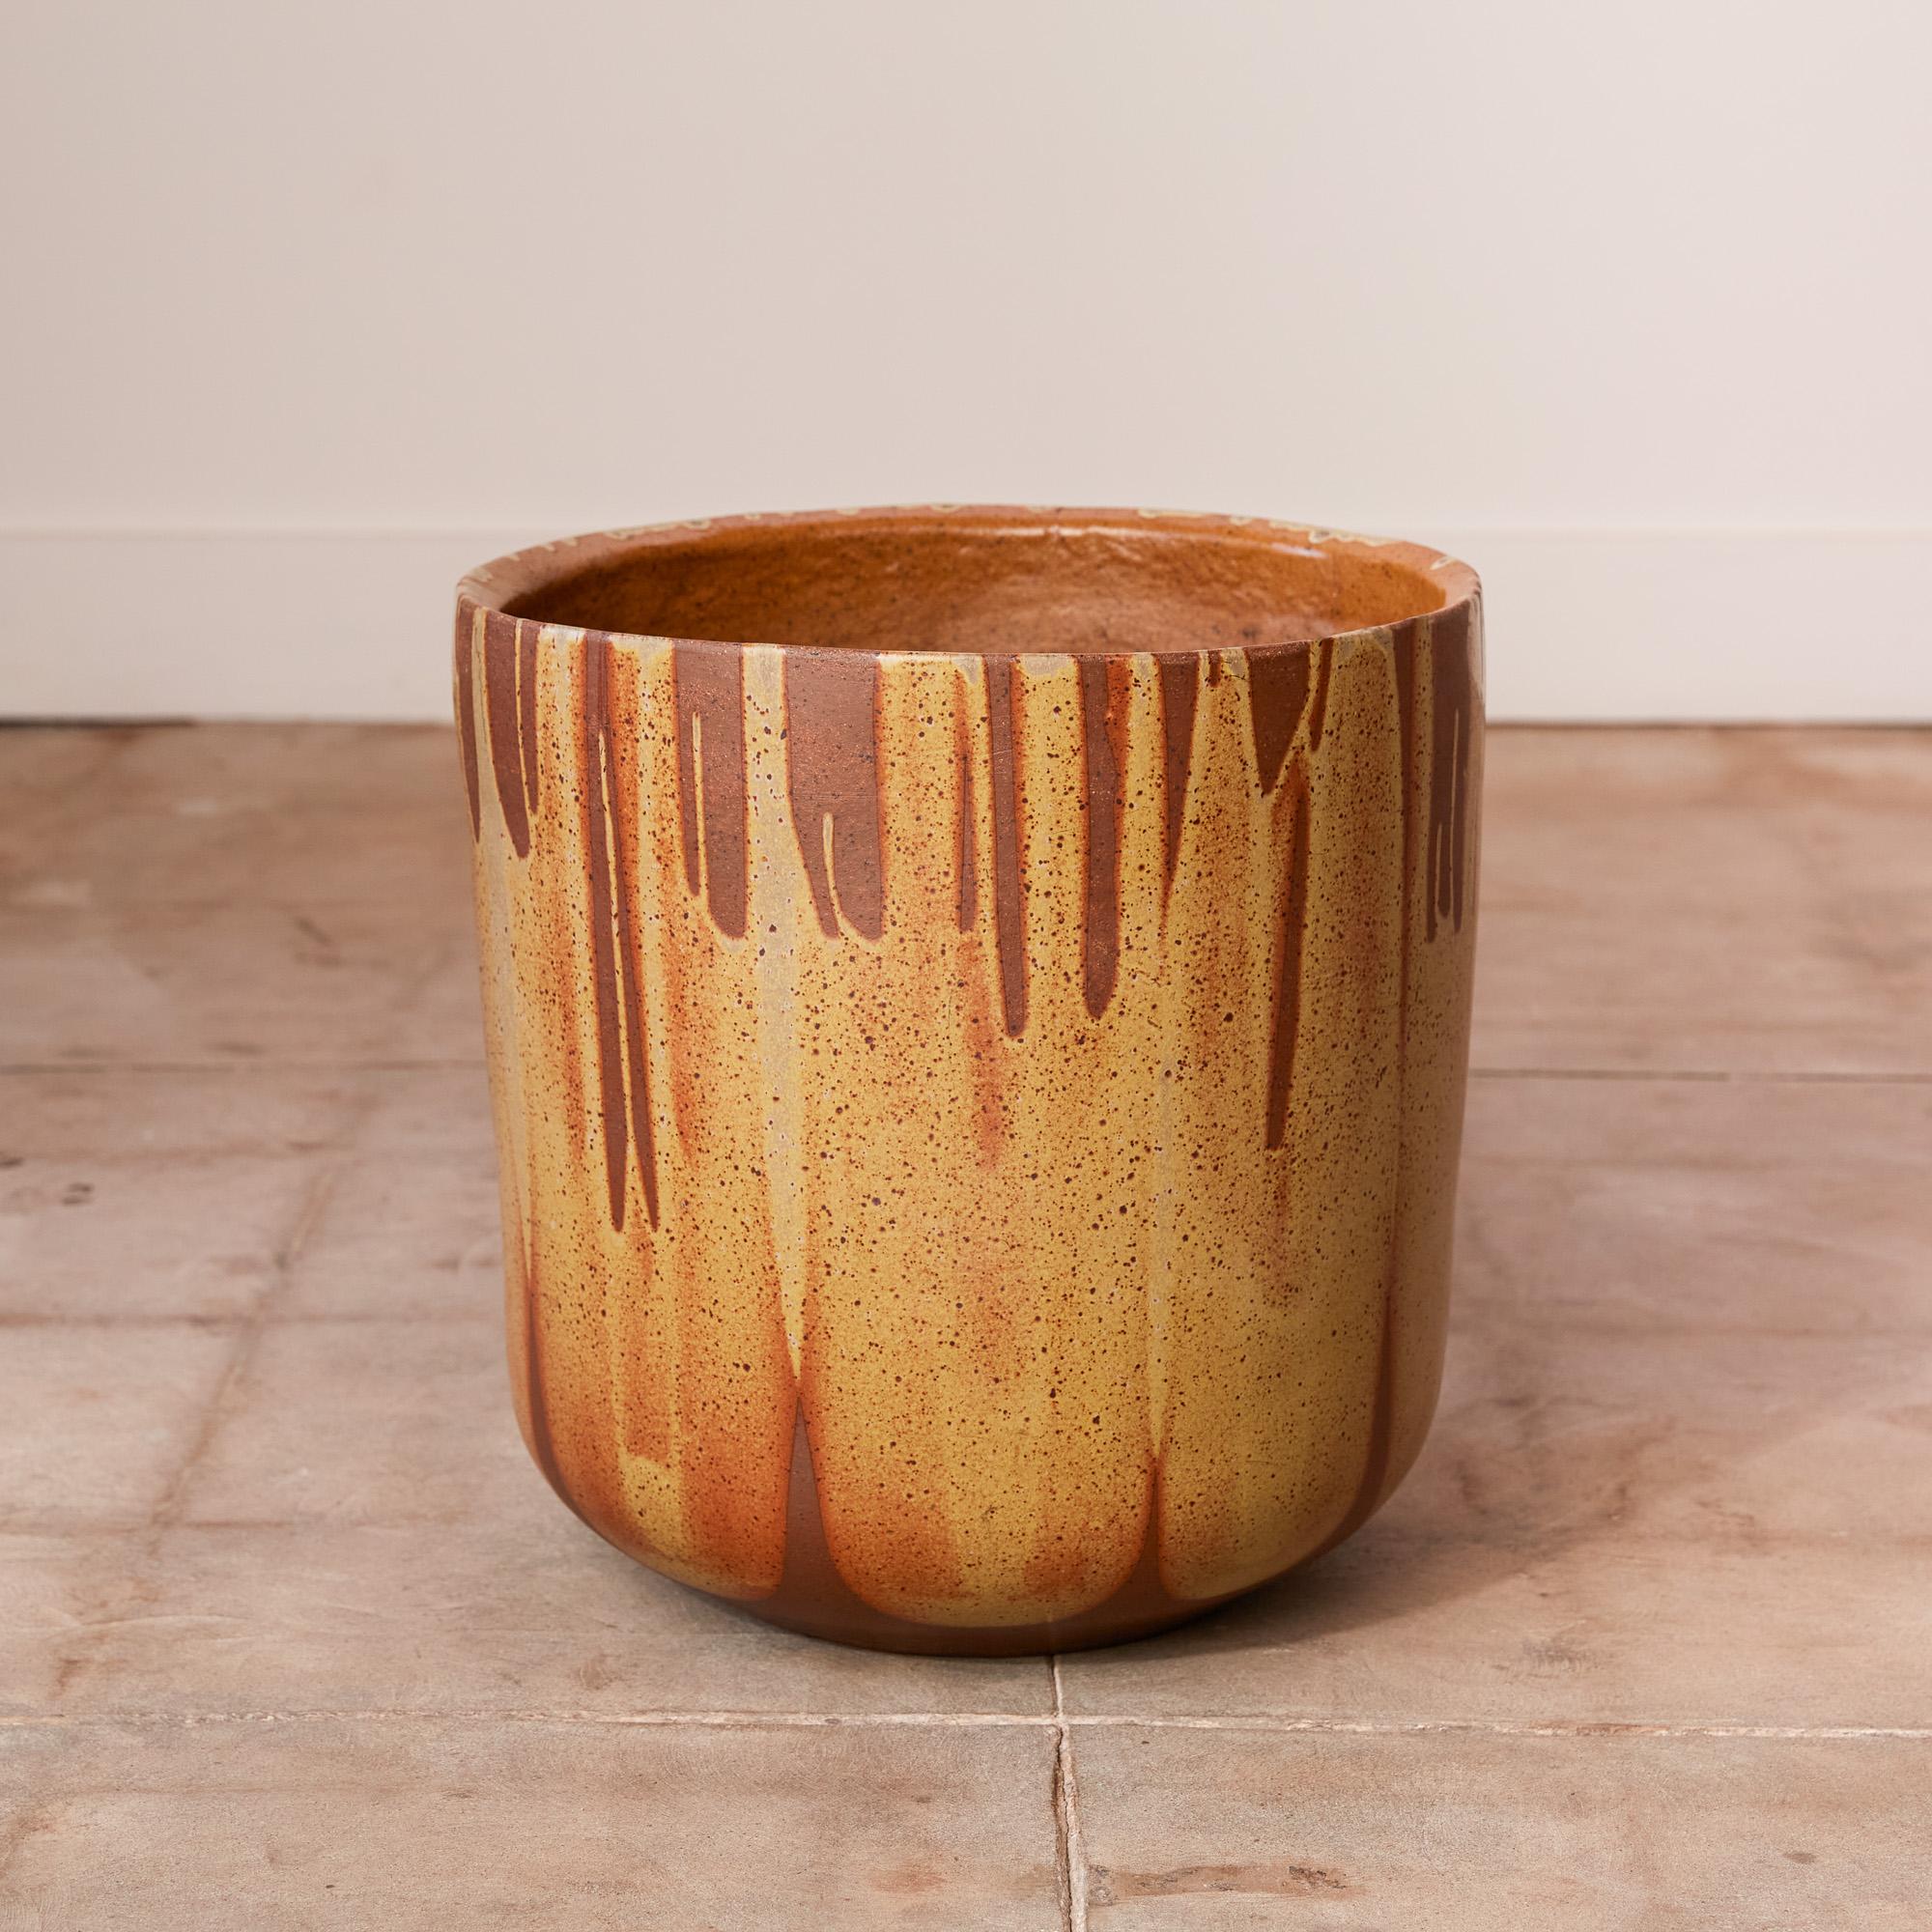 A tulip-shaped planter by David Cressey for the Pro/Artisan collection by Architectural Pottery with Cressey’s signature “Flame Glaze.” This planter has a rounded bottom that widens towards the opening, a simple shape rendered dramatic by the